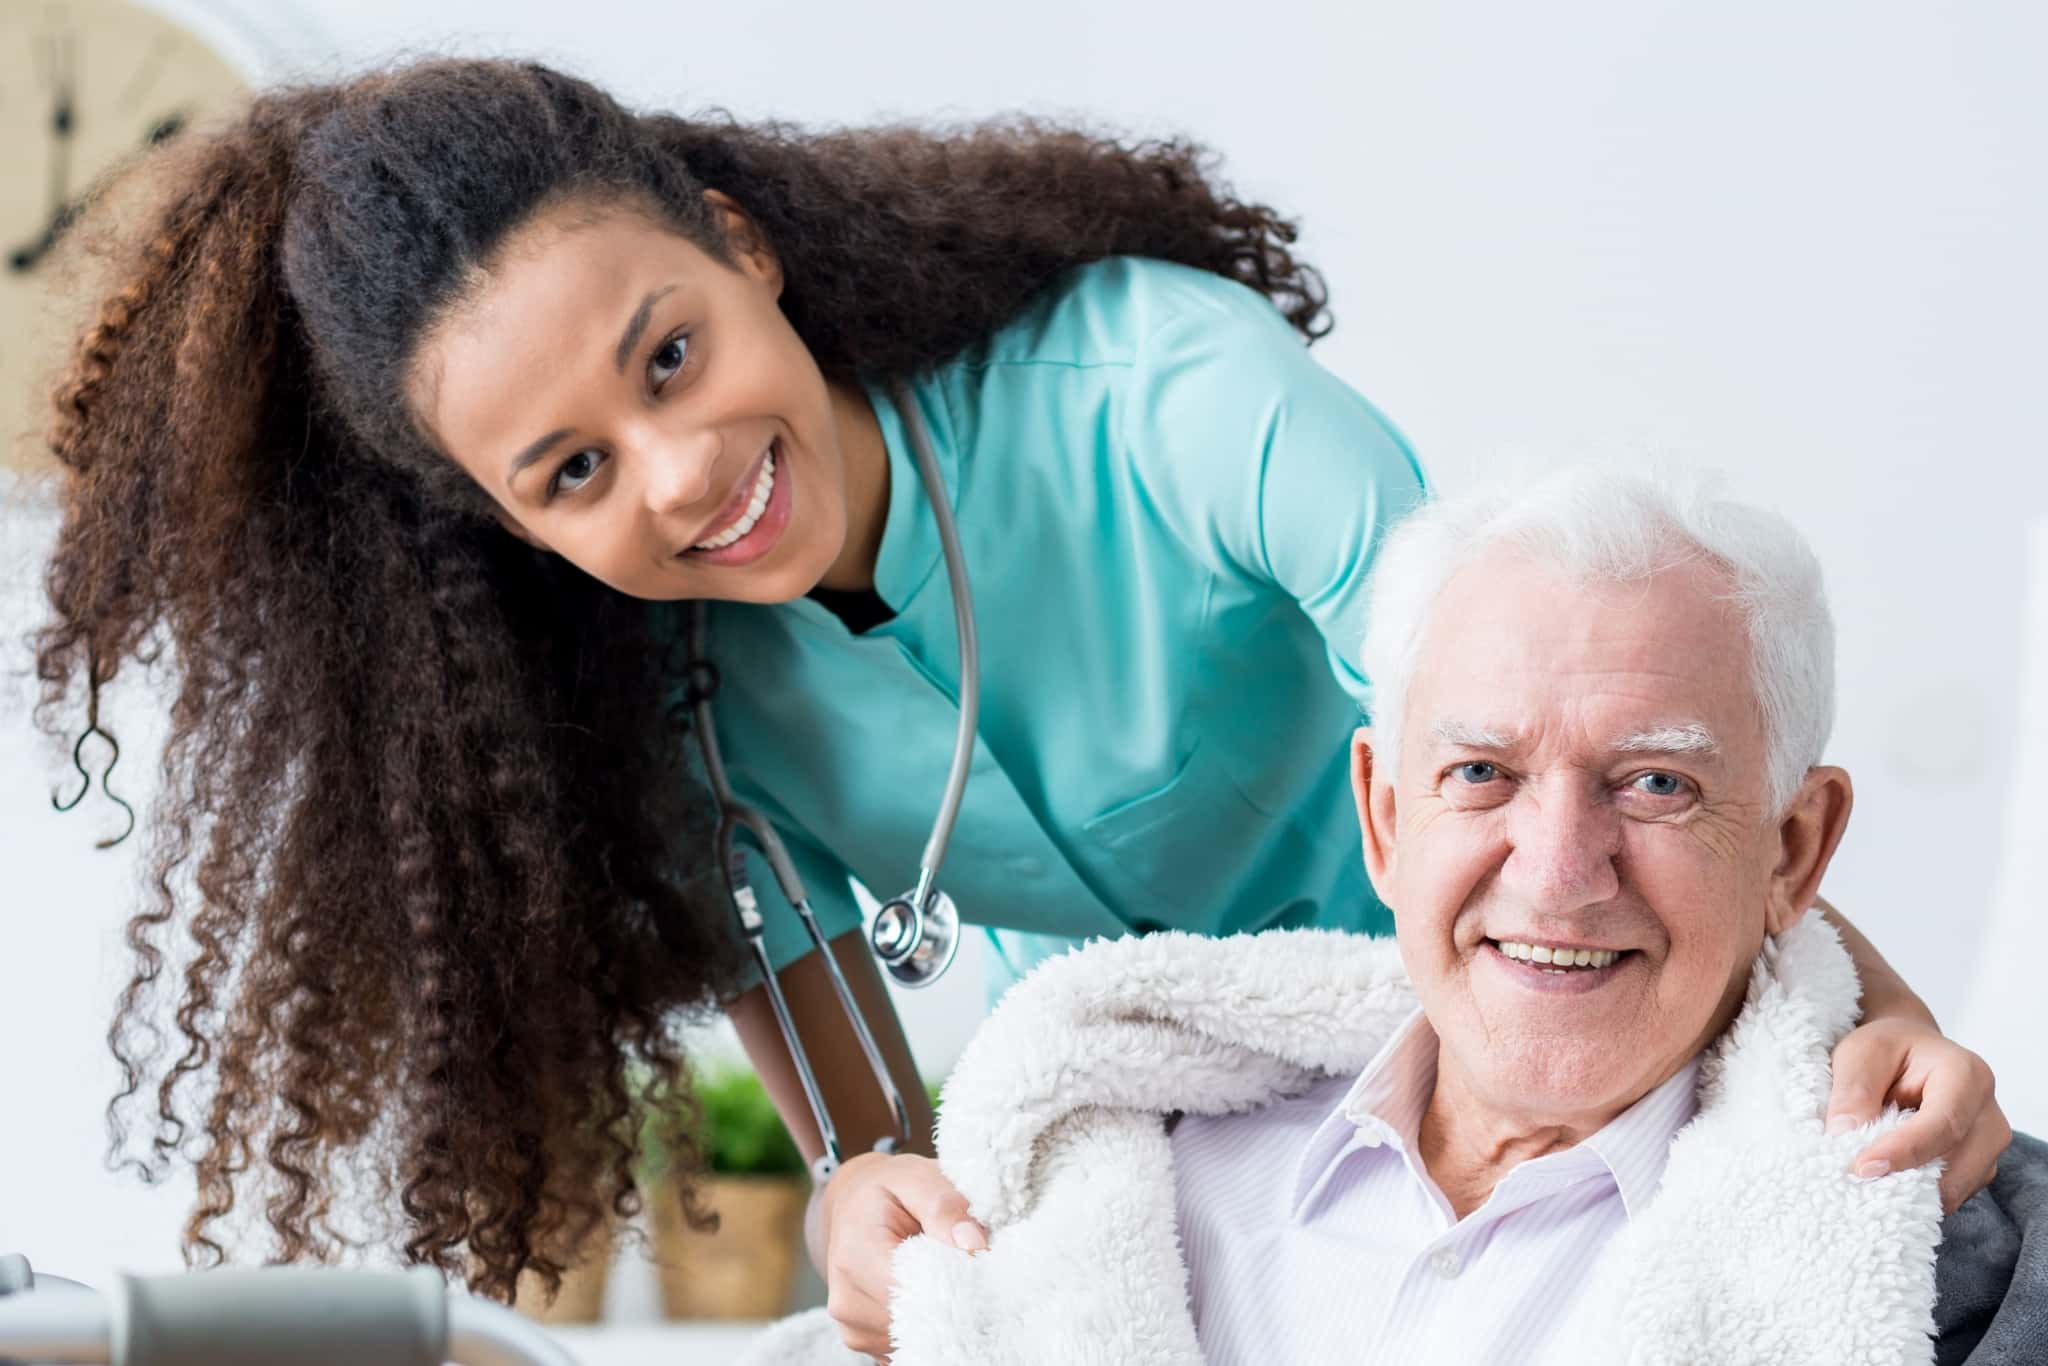 Smiling nurse with an elderly patient